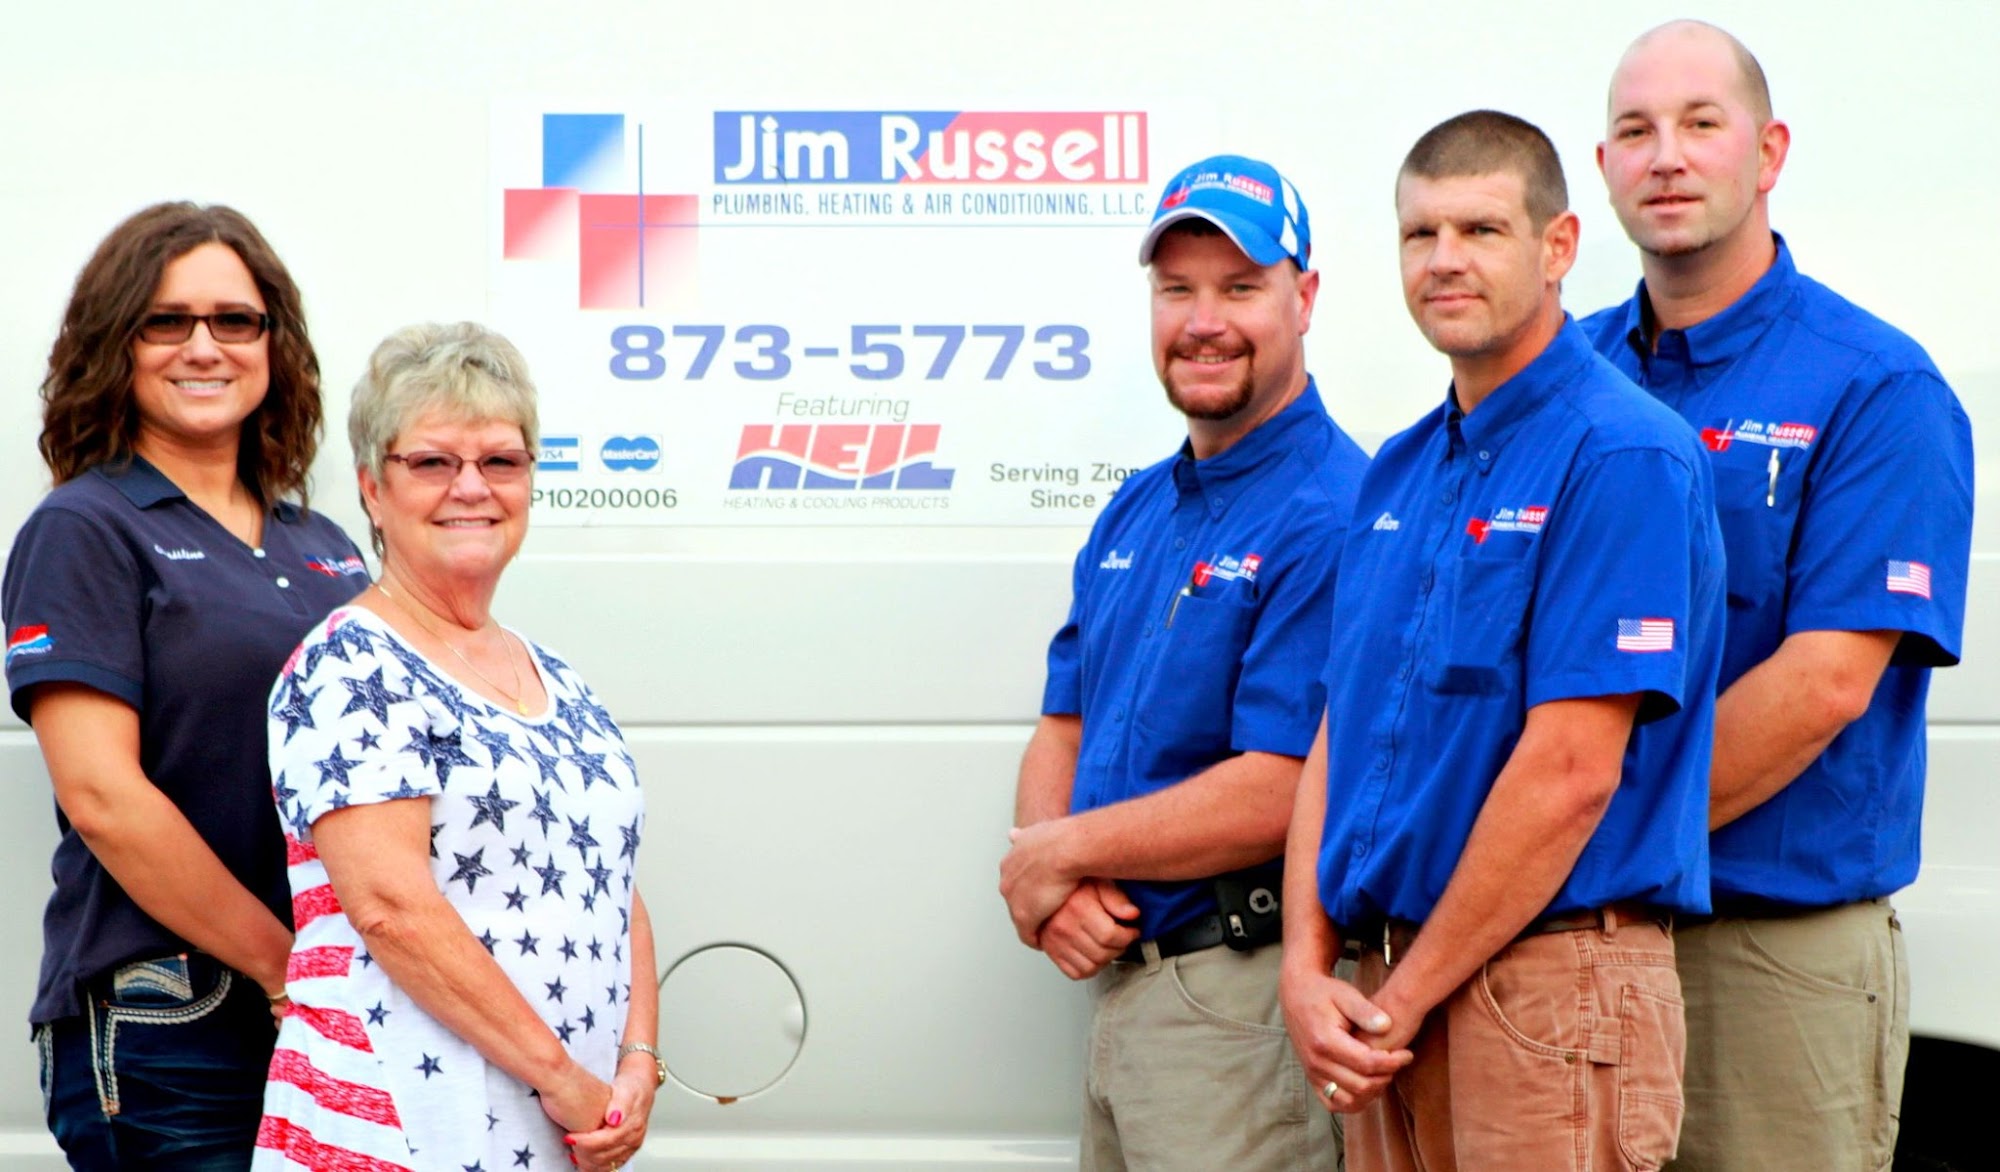 Jim Russell Plumbing, Heating and Air Conditioning